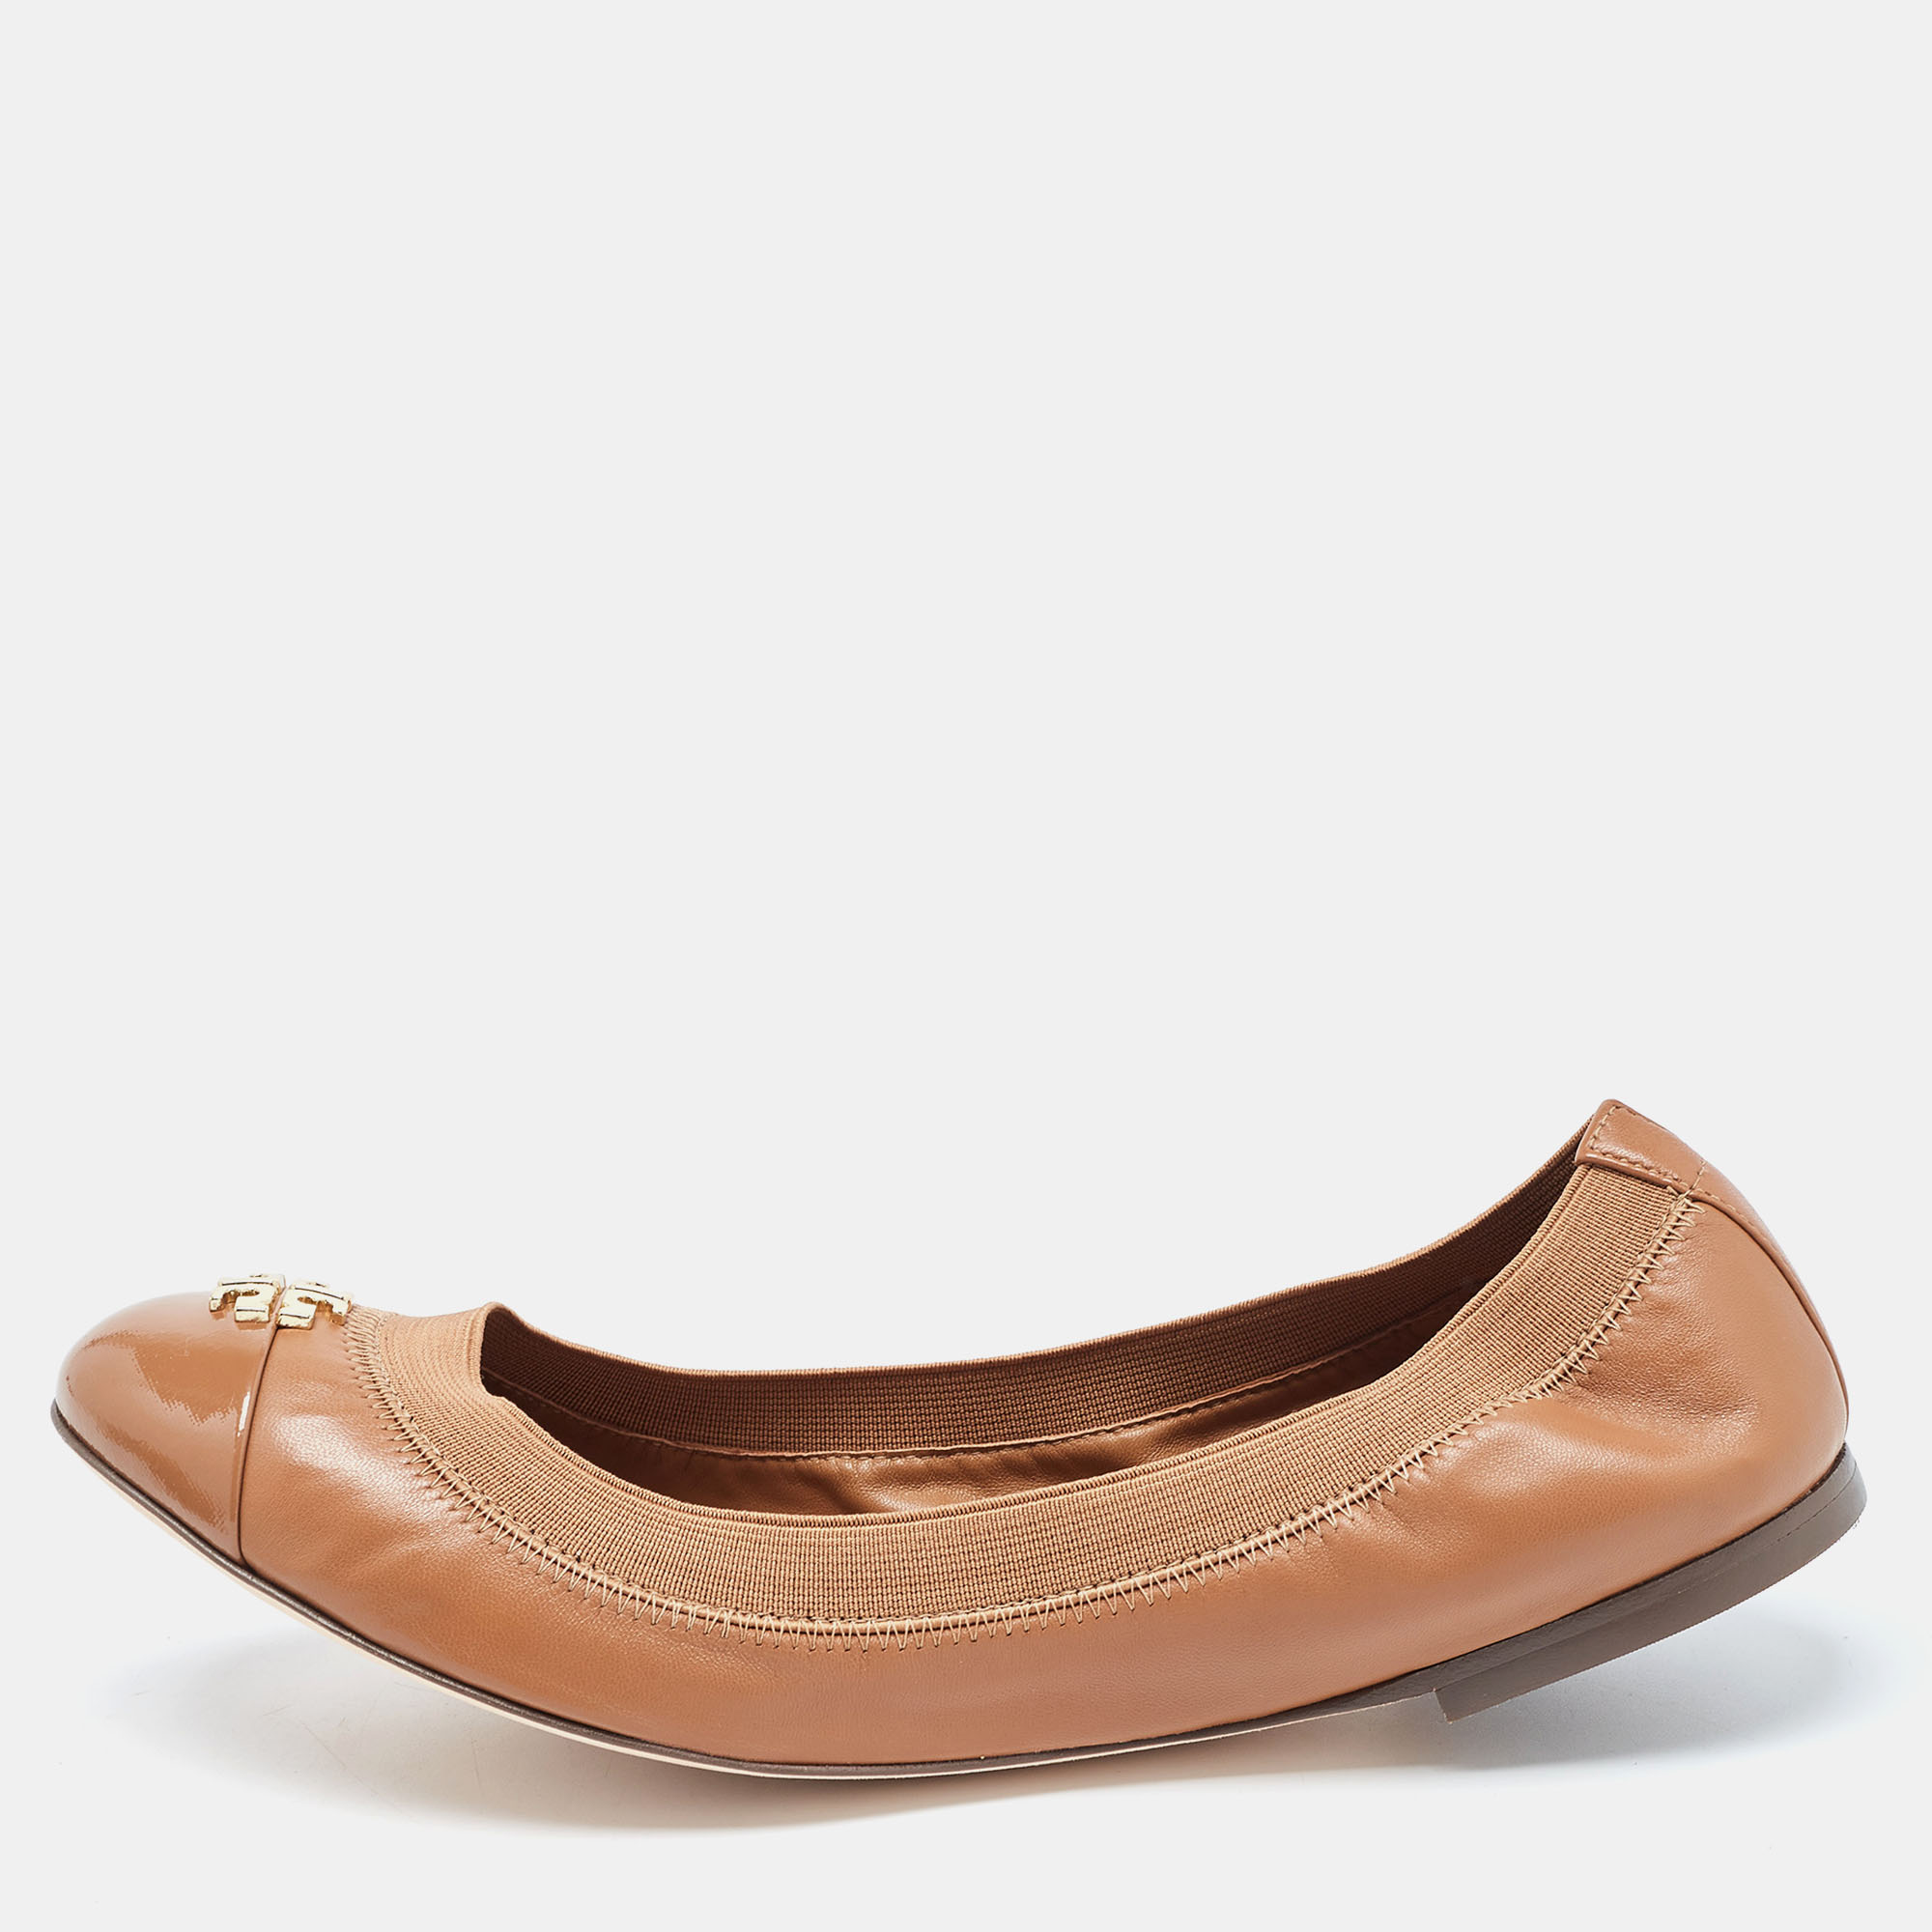 Tory Burch Brown Patent And Leather Jolie Scrunch Ballet Flats Size 39.5